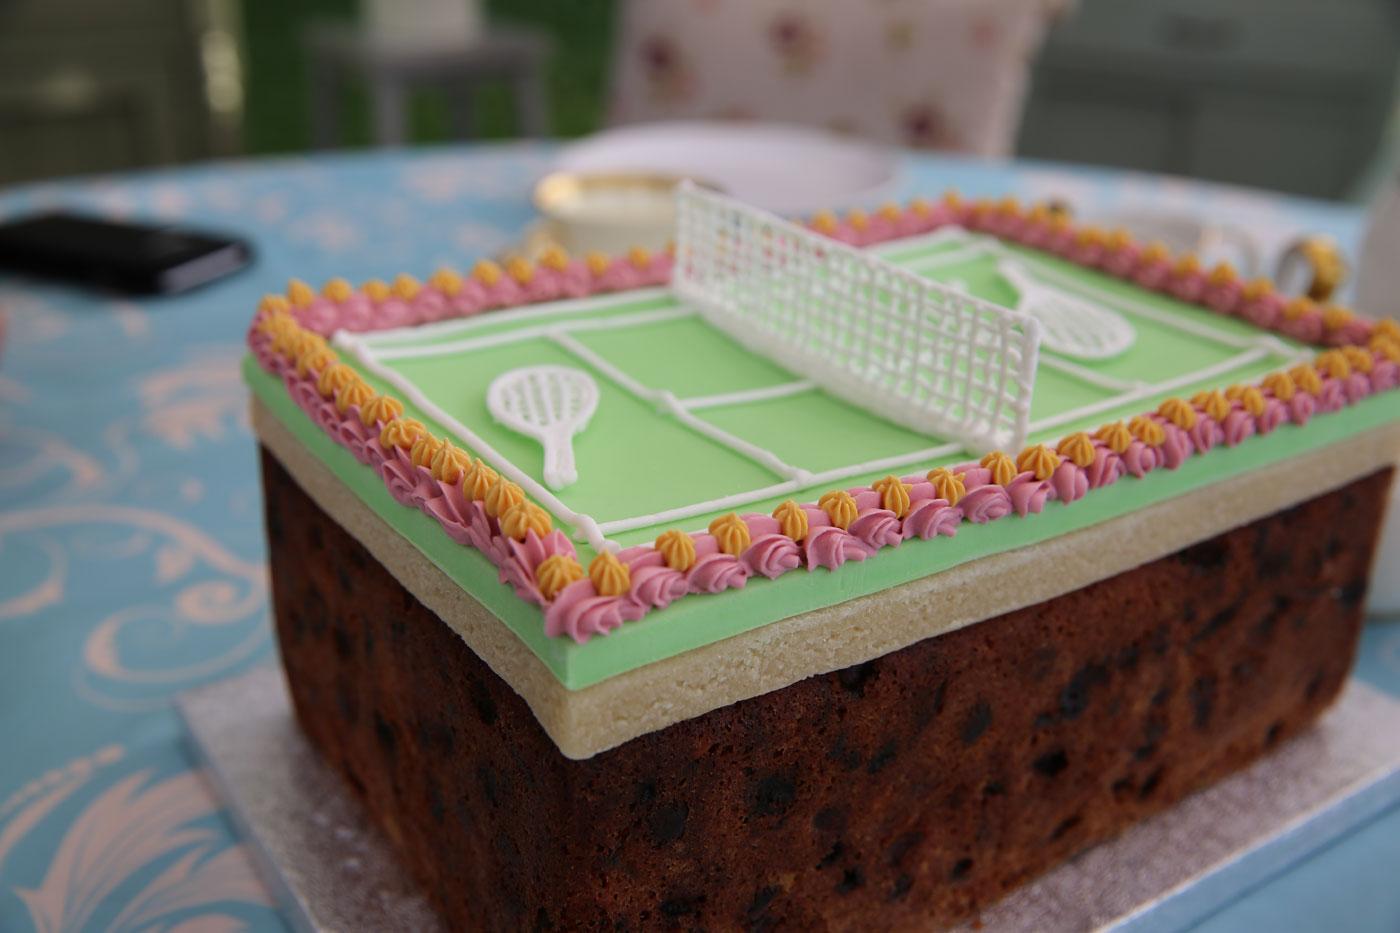 Tennis Fruit Cake from The Great British Baking Show. (Courtesy of Love Productions)